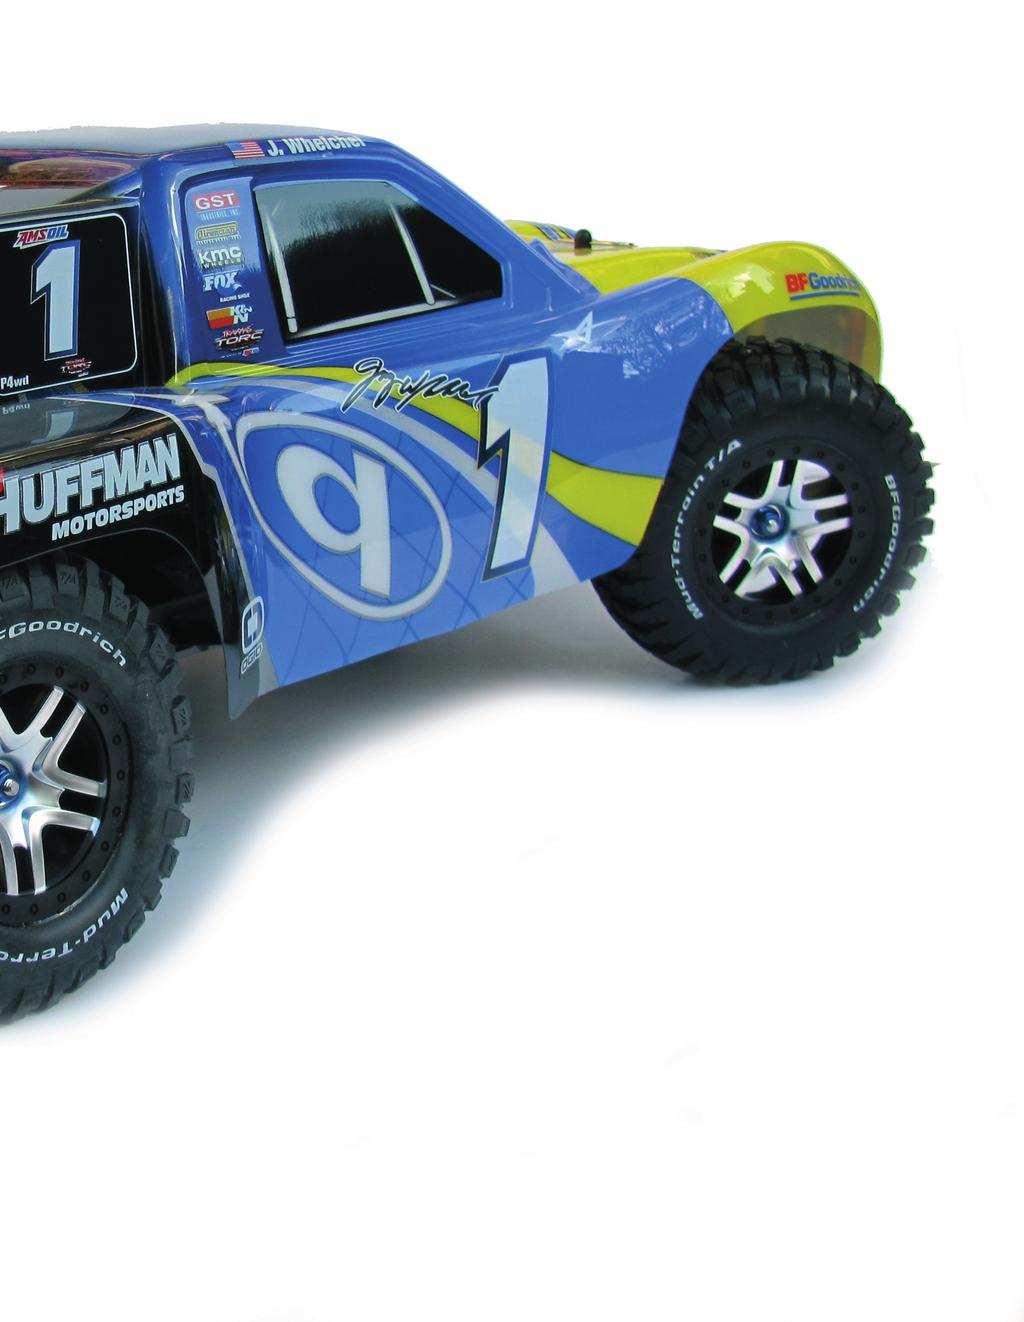 ? RTR REVIEW "The Ultimate Edition s spec list reads like a hop-up catalogue" Main pic: TORC driver Chet Huffman s livery reproduced in perfect detail. The number 1 on the side is for a good reason!